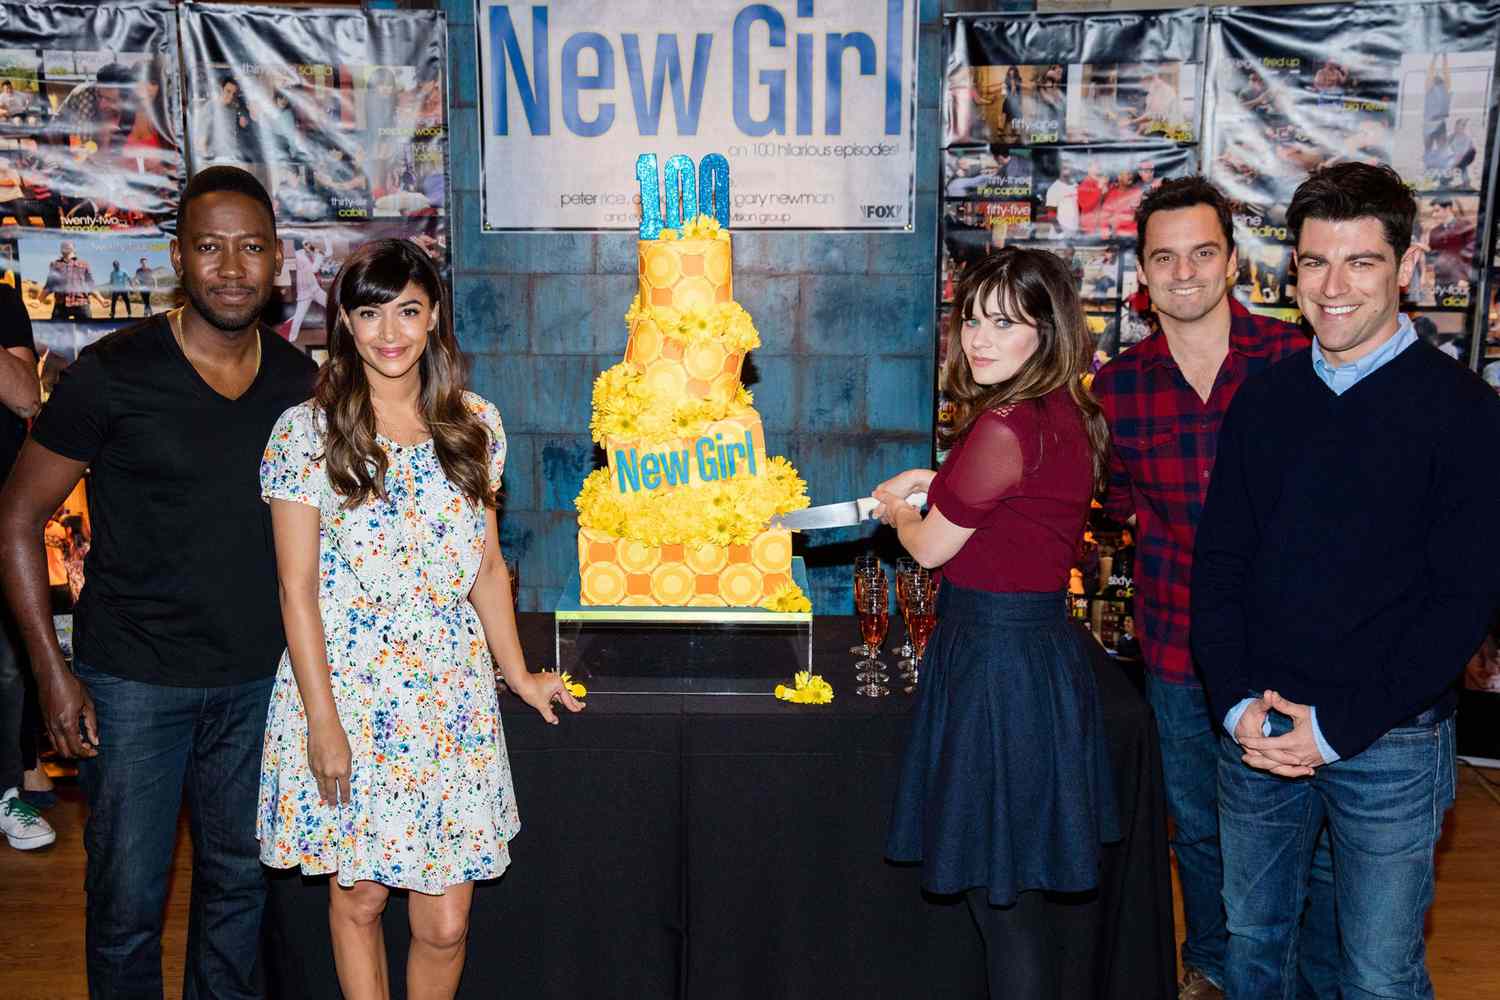 New Girl's 100th episode